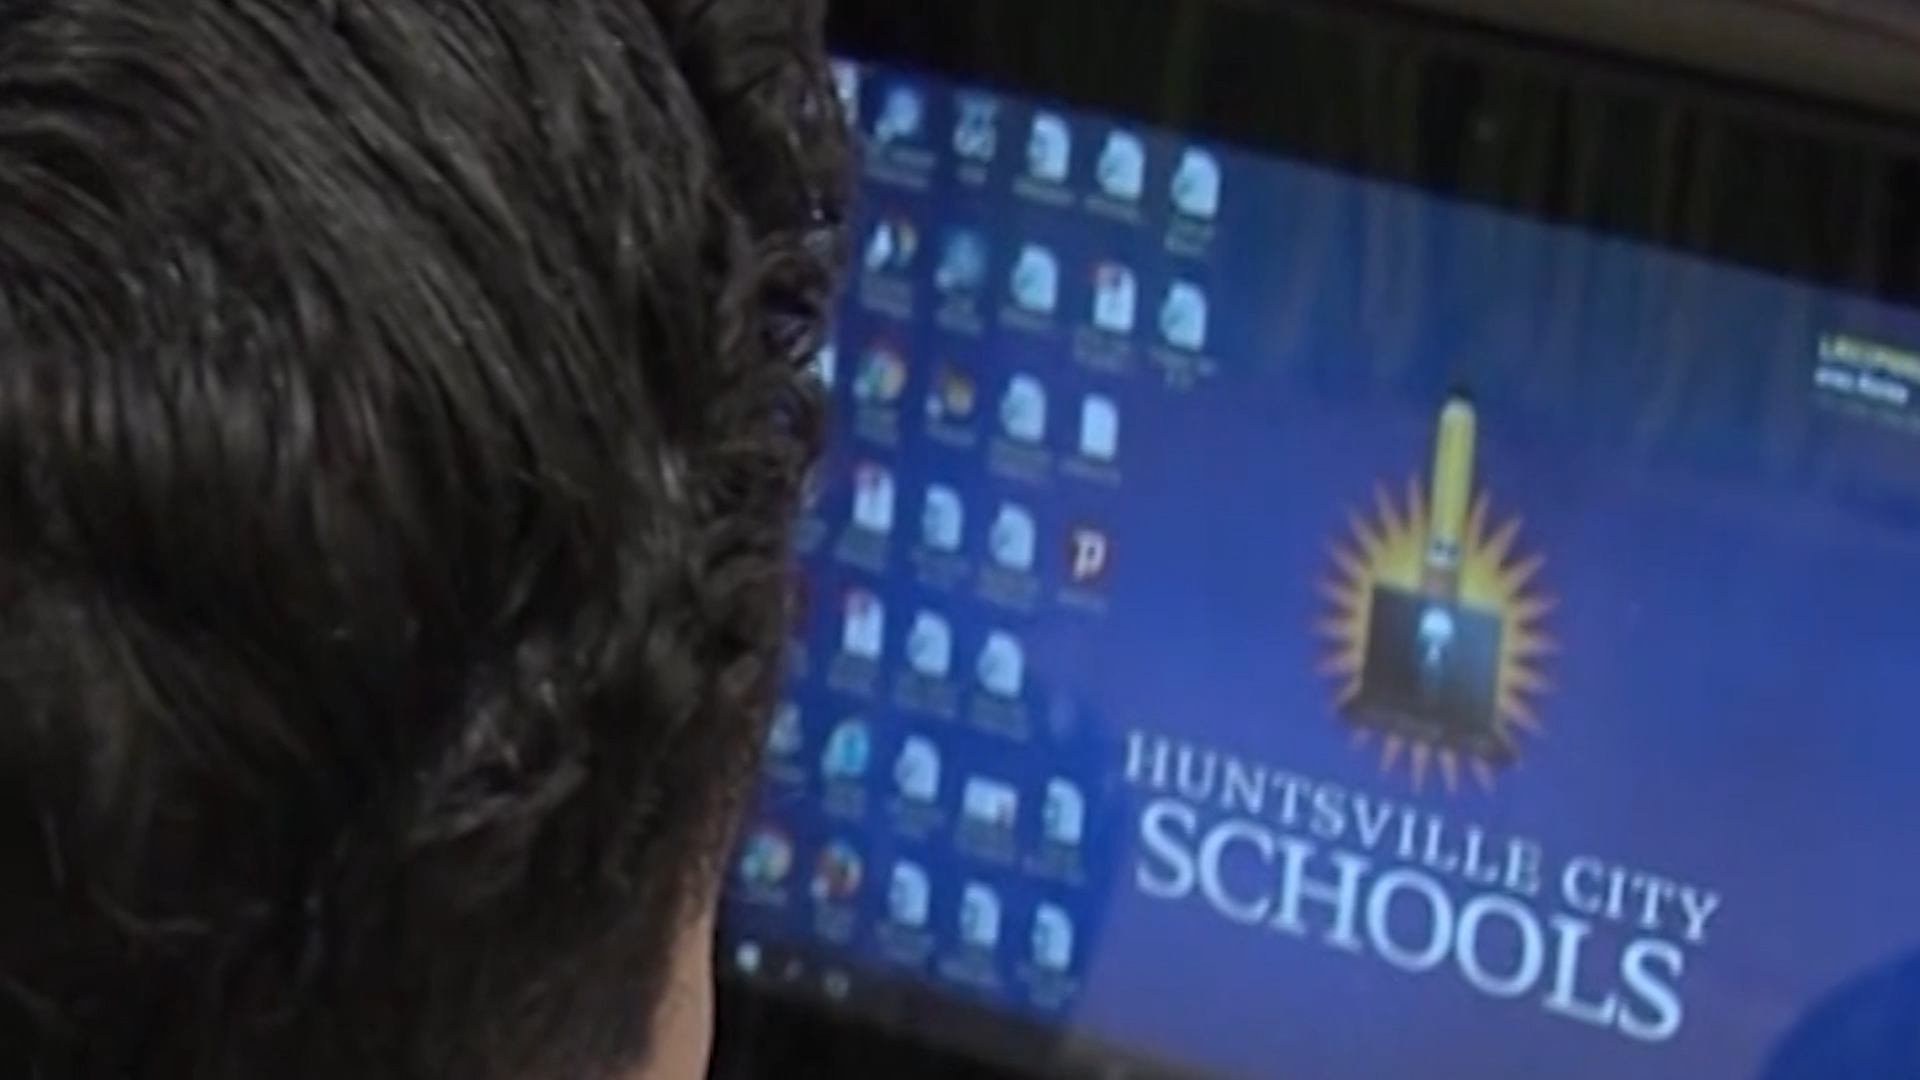 Huntsville City Schools Back in Session After Cyber Attack